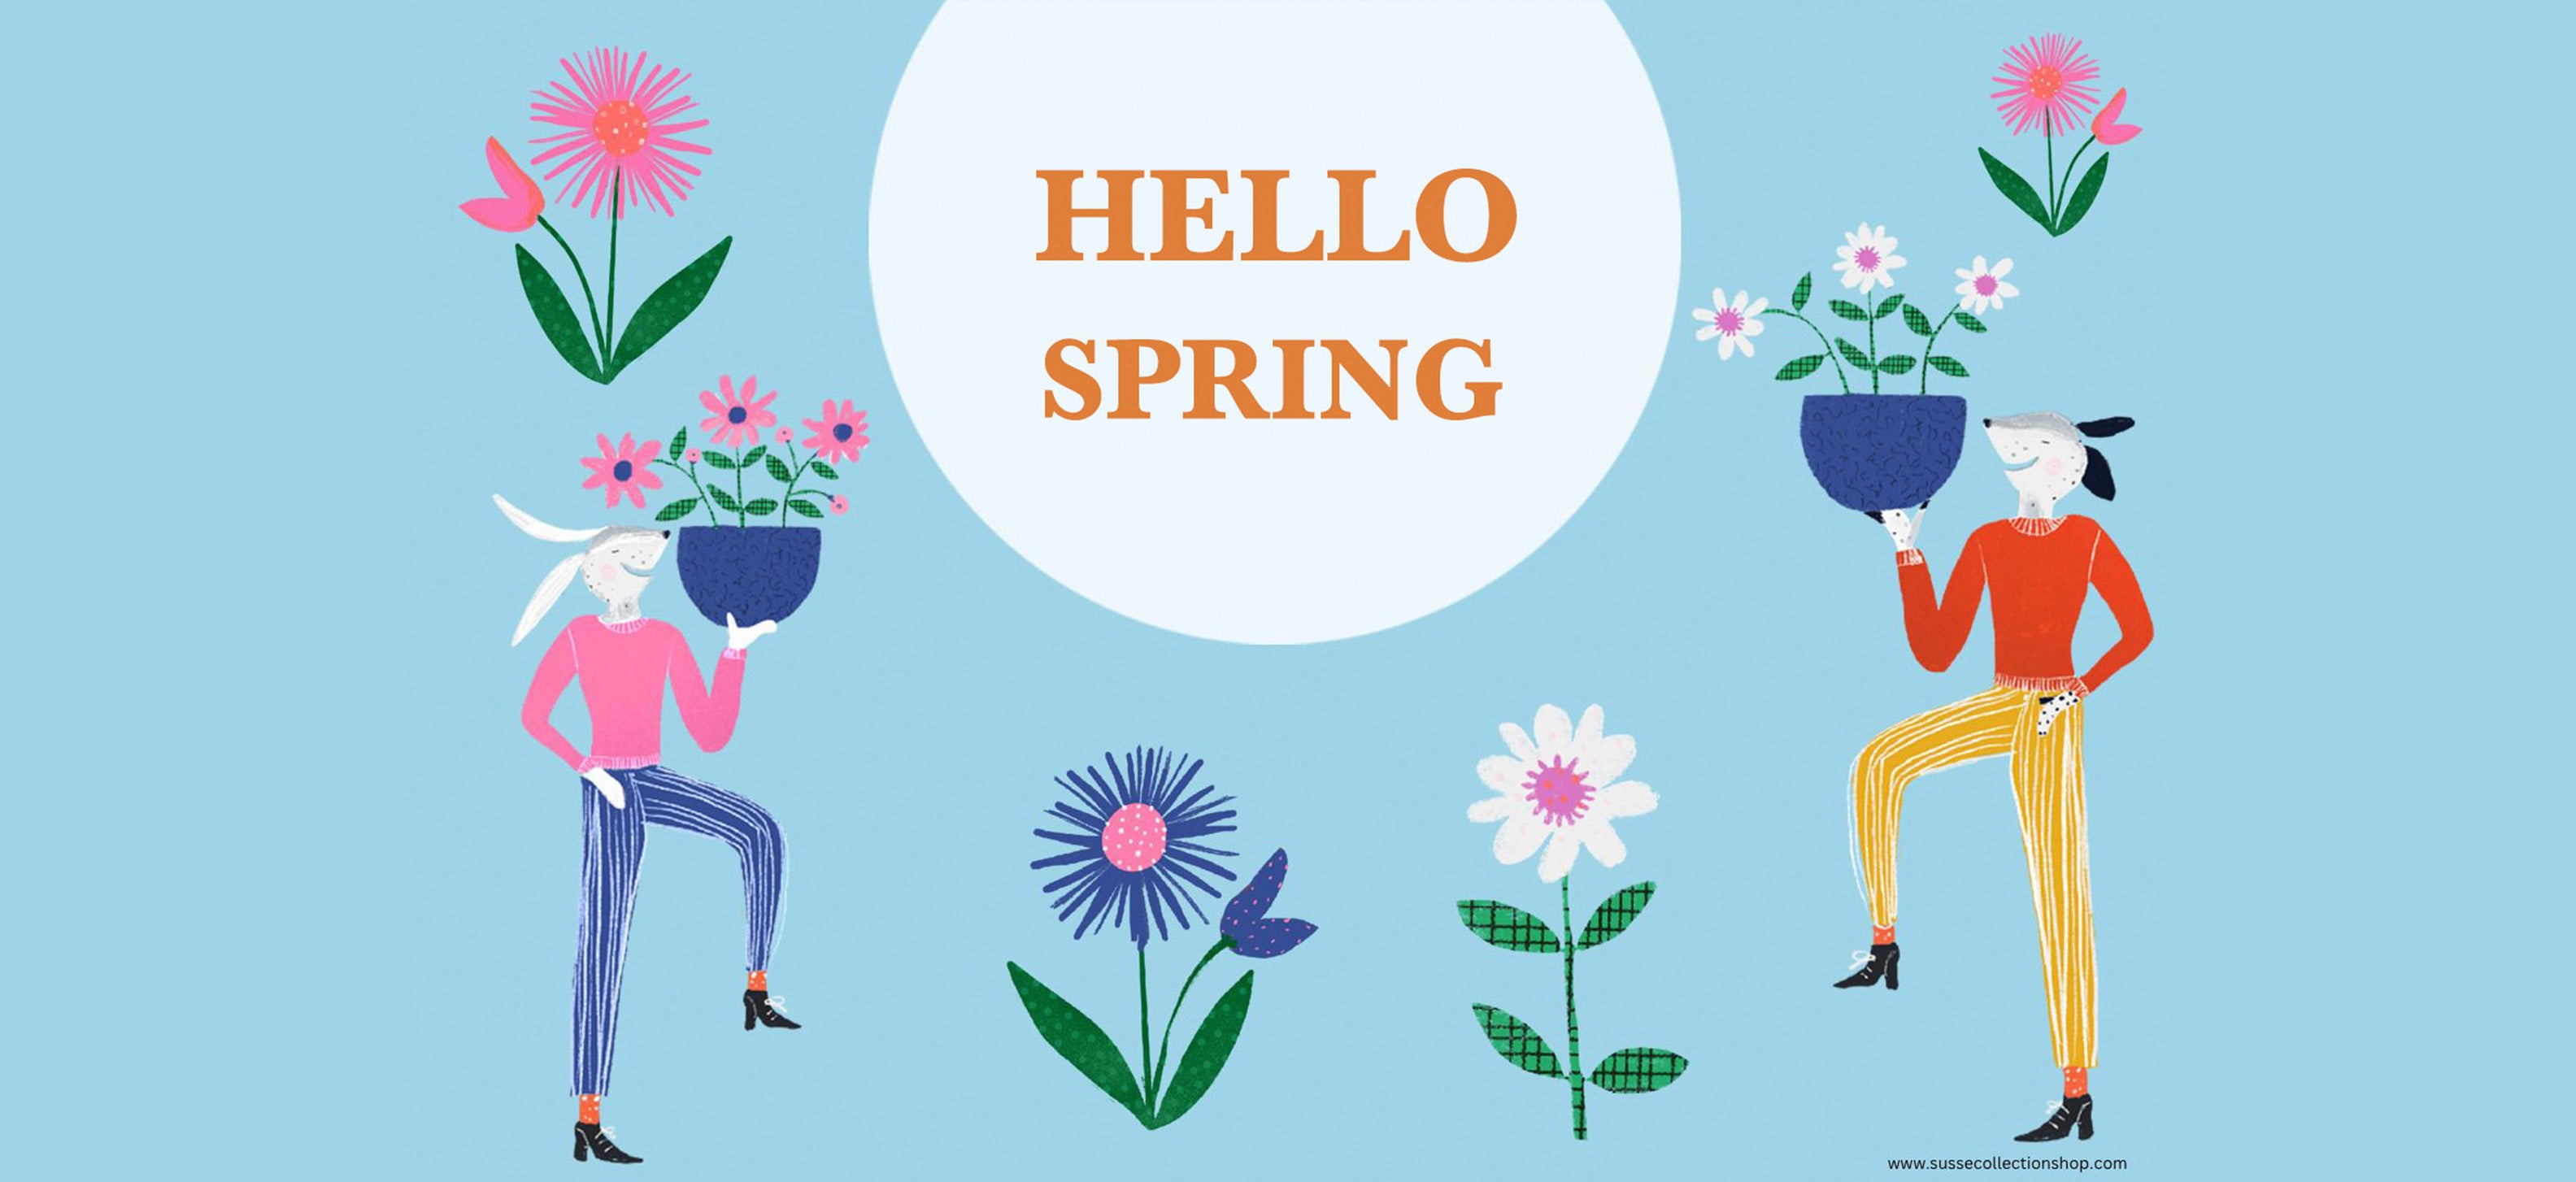 Susse Collection shop hello spring banner